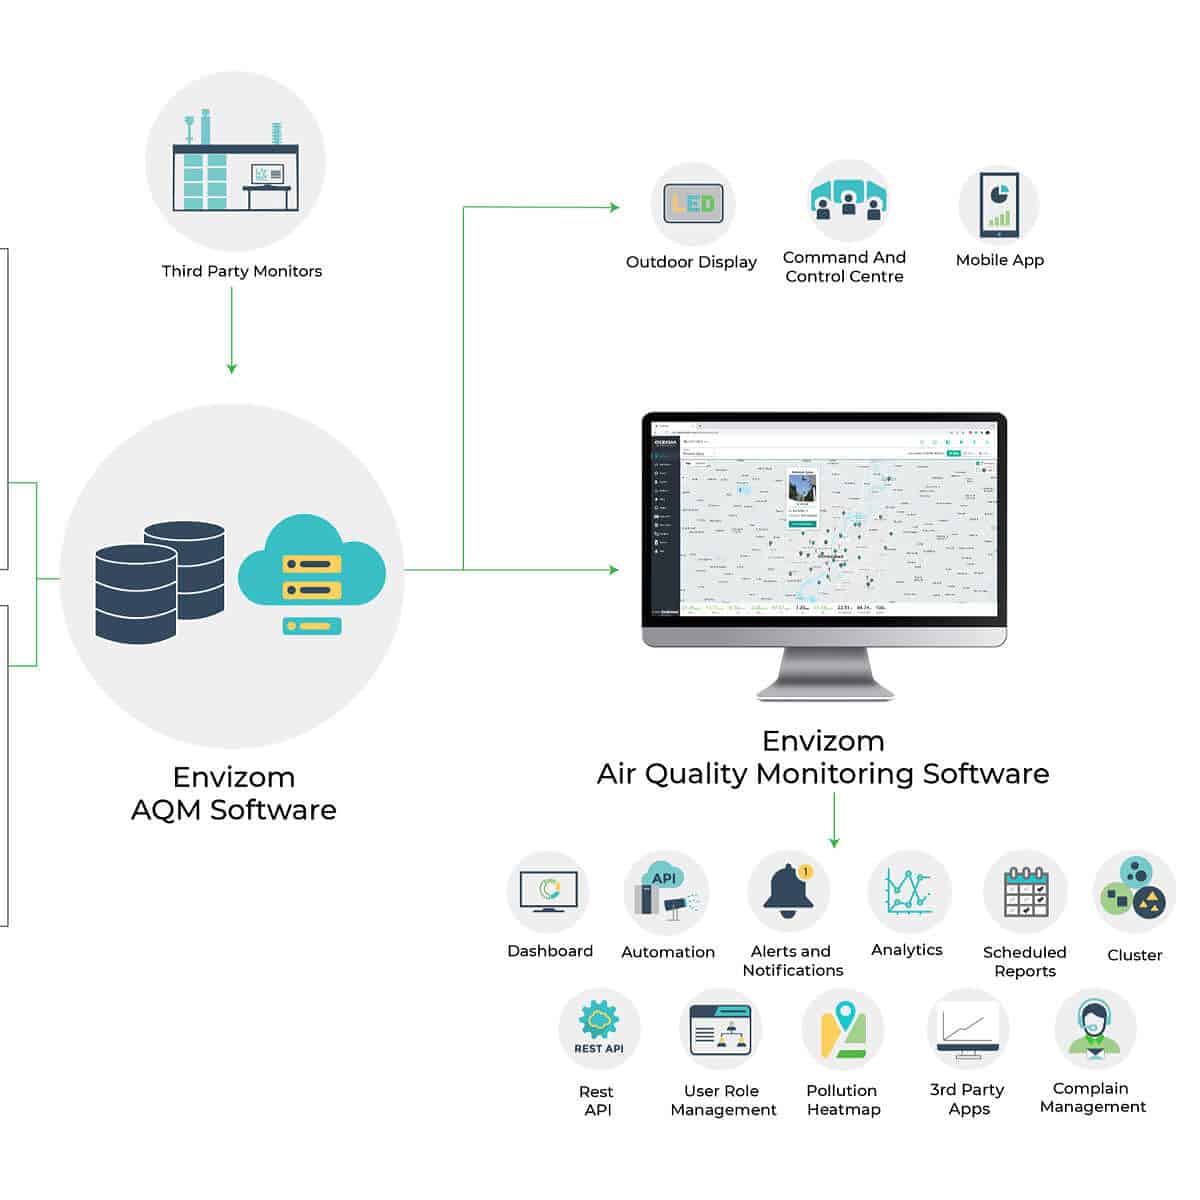 With our web-based air quality monitoring software – Envizom, the professionals can access and analyze the air quality data remotely from anywhere.